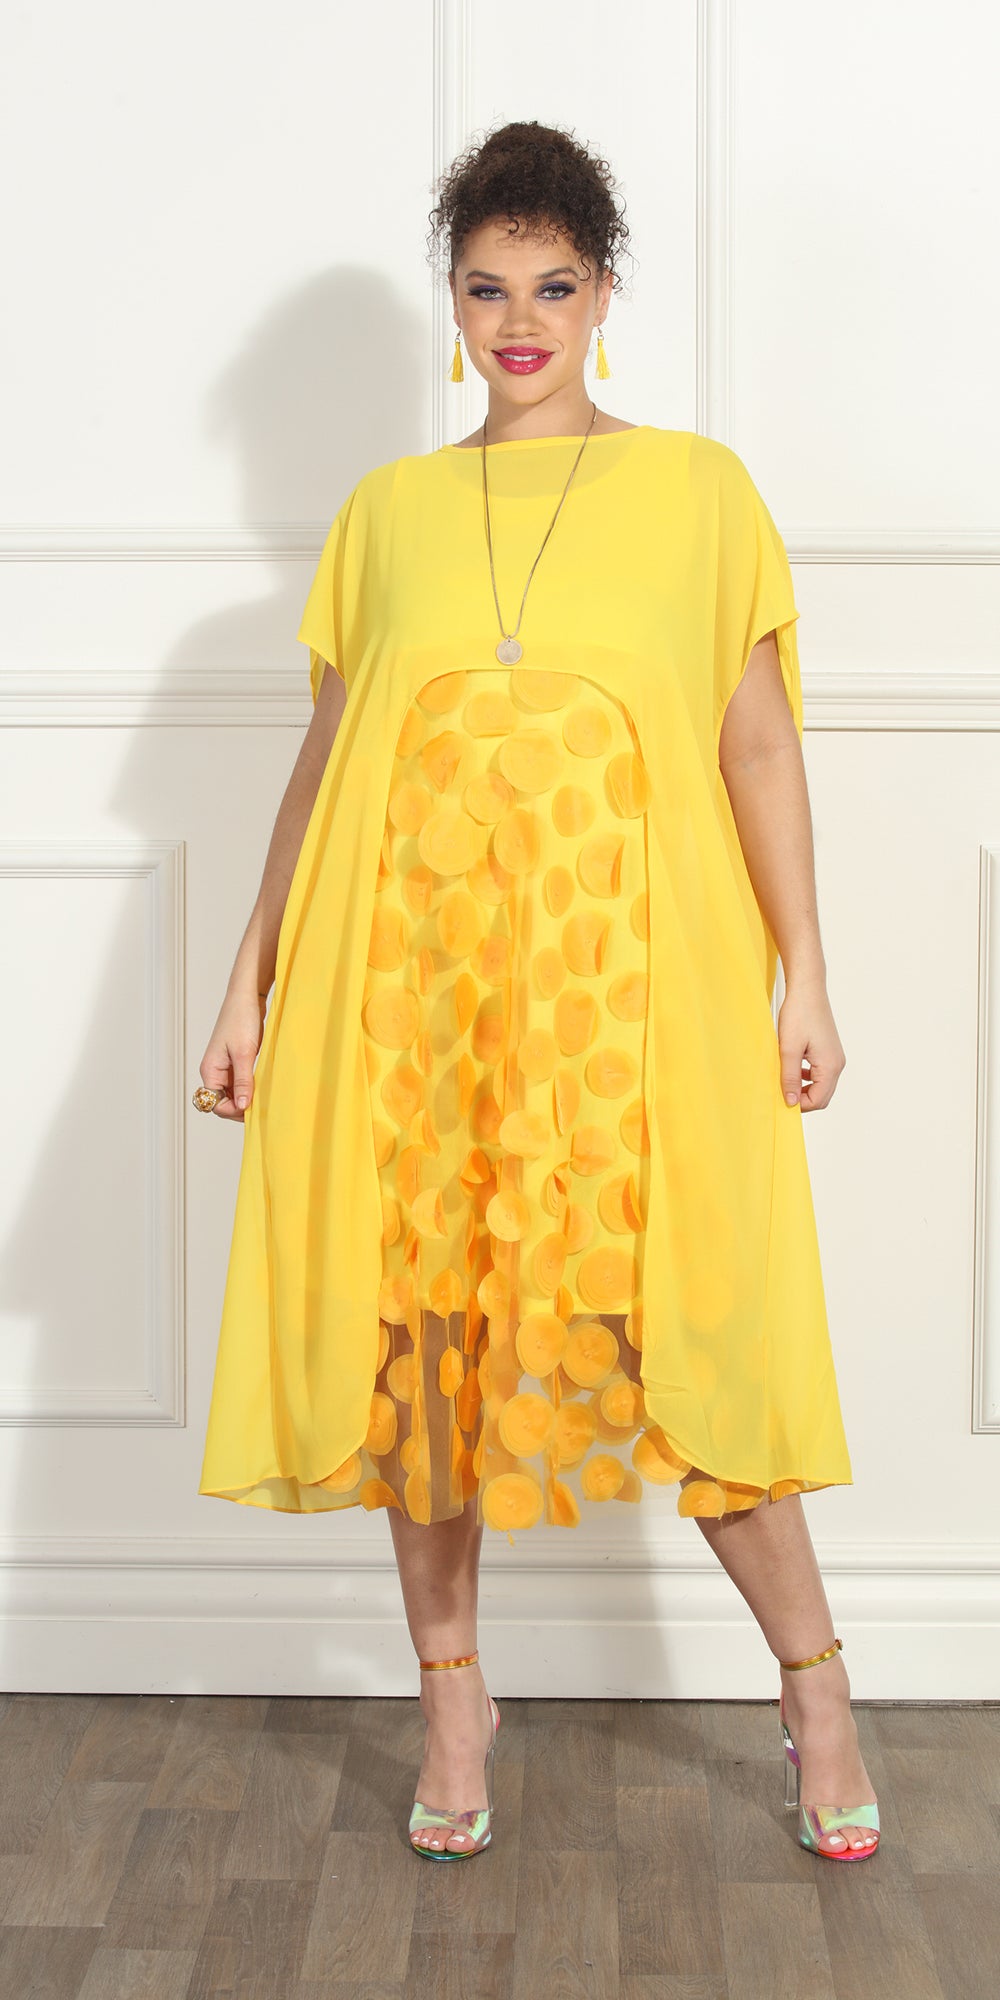 Luxe Moda LM296 - Yellow - Sheer Dress and Cover